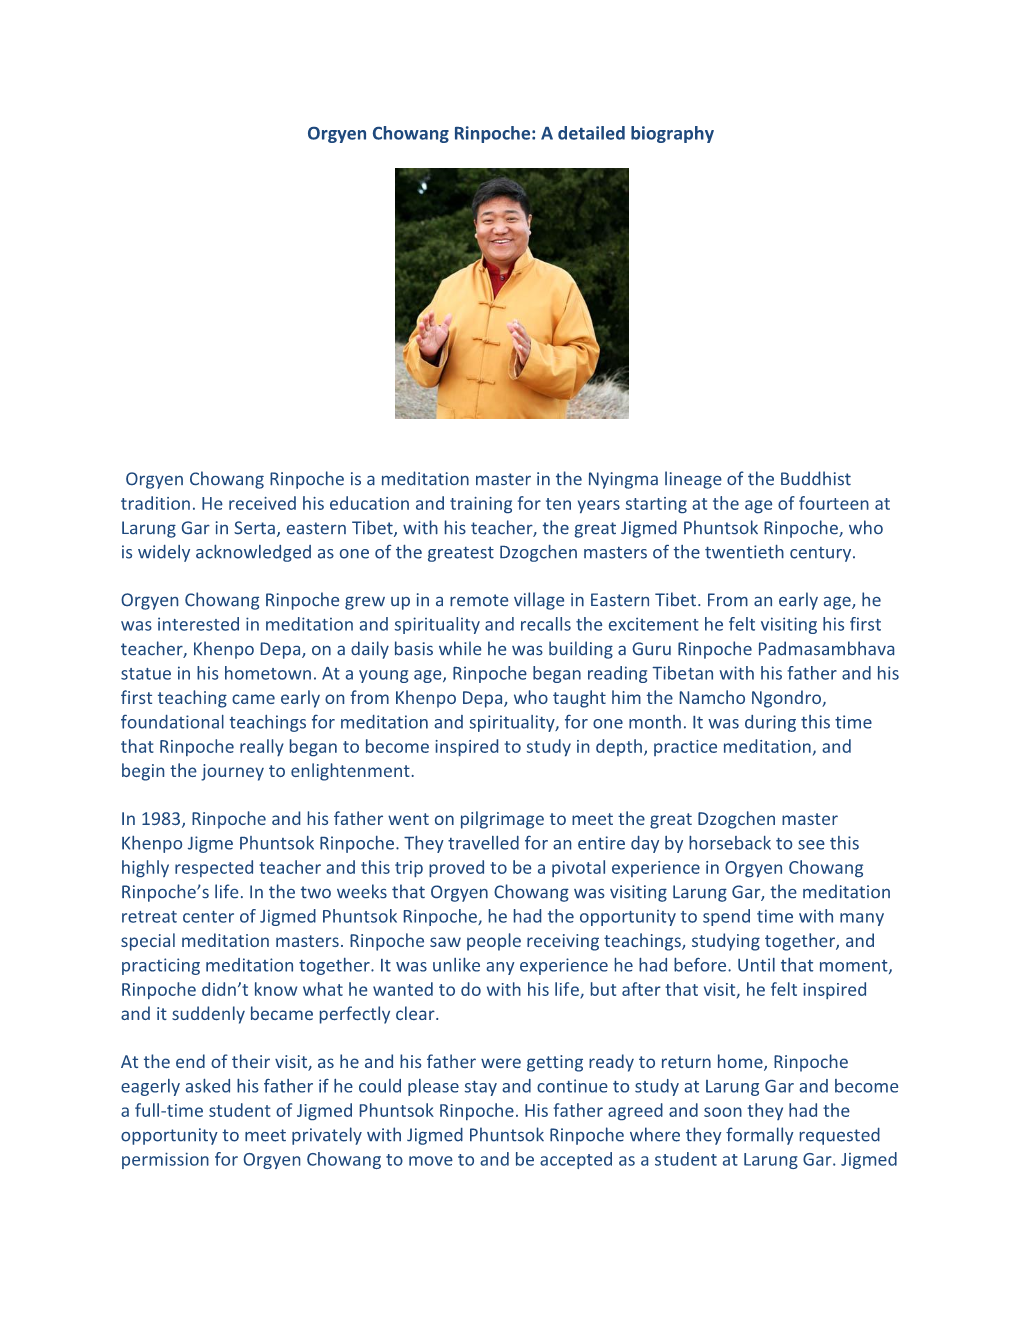 A Detailed Biography Orgyen Chowang Rinpoche Is a Meditation Master in the Nyingma Lineage of the Buddh